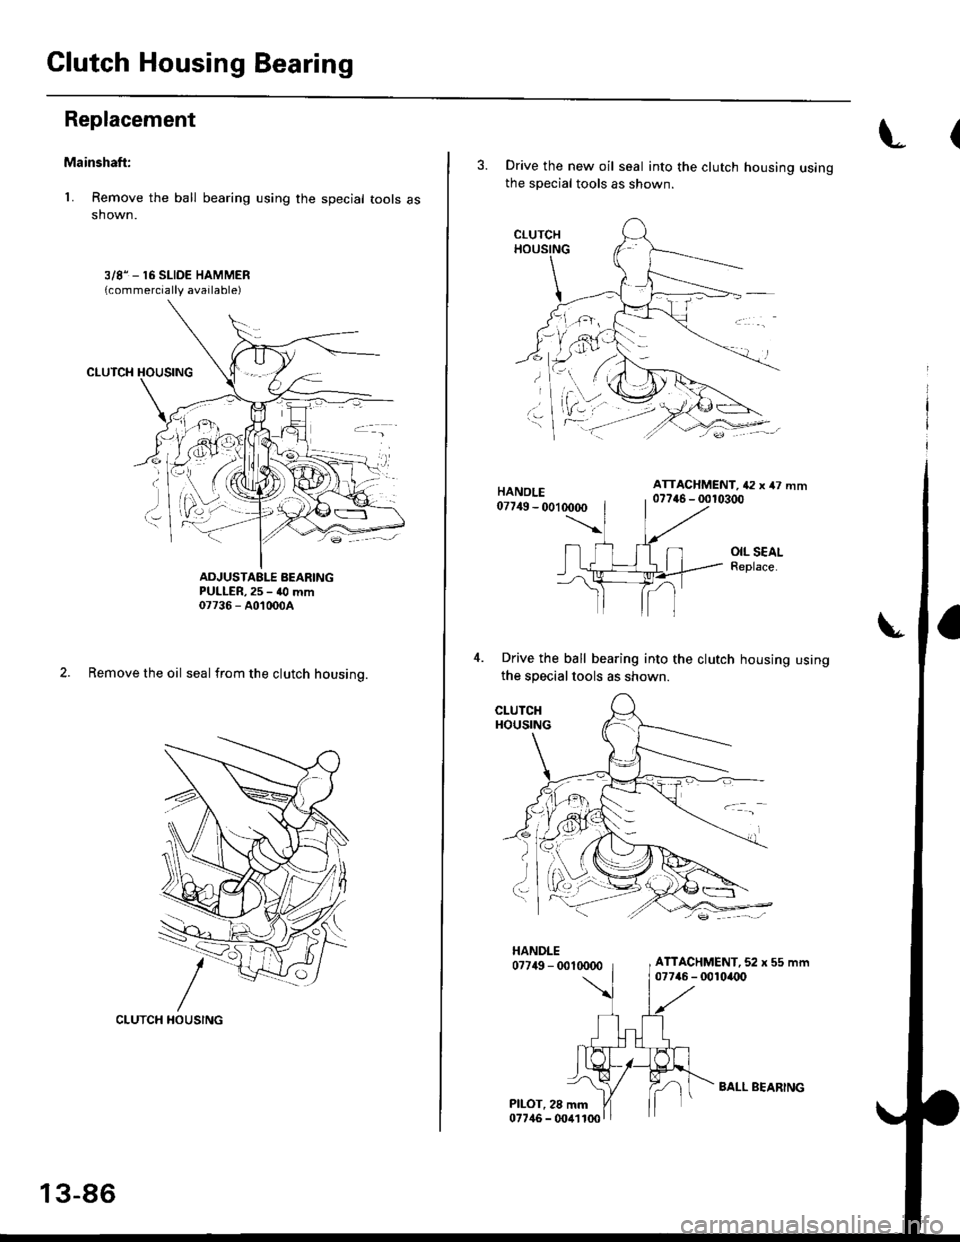 HONDA CIVIC 1996 6.G User Guide Clutch Housing Bearing
Replacement
Mainshaft:
L Remove the ball bearing using the special tools asshown.
3/81_ 16 SLIDE HAMMER{commercially available)
ADJUSTAELE BEARINGPULLER, 25 - 40 mm07736 - A0100